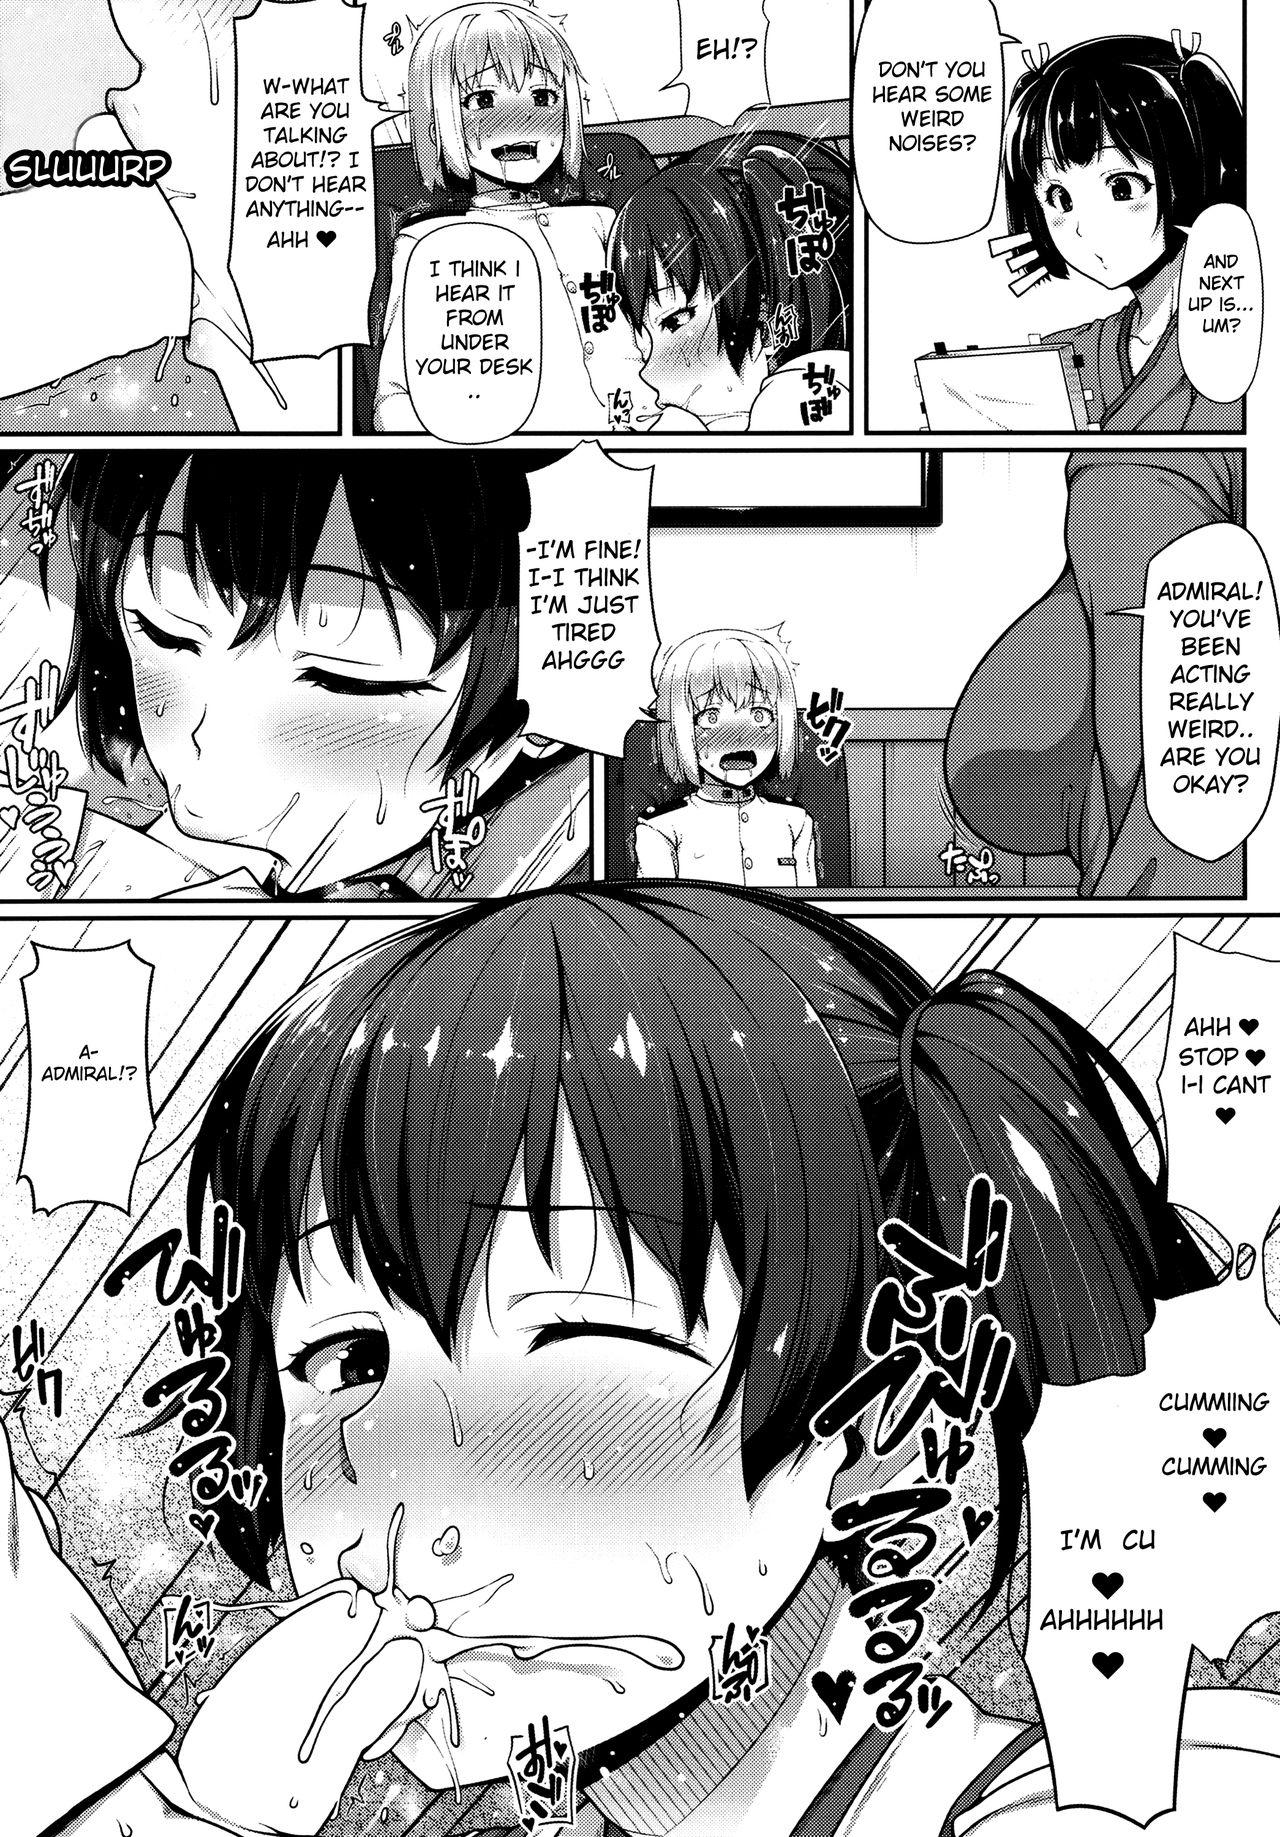 Kagasan is an Even More Perverted Sister 7